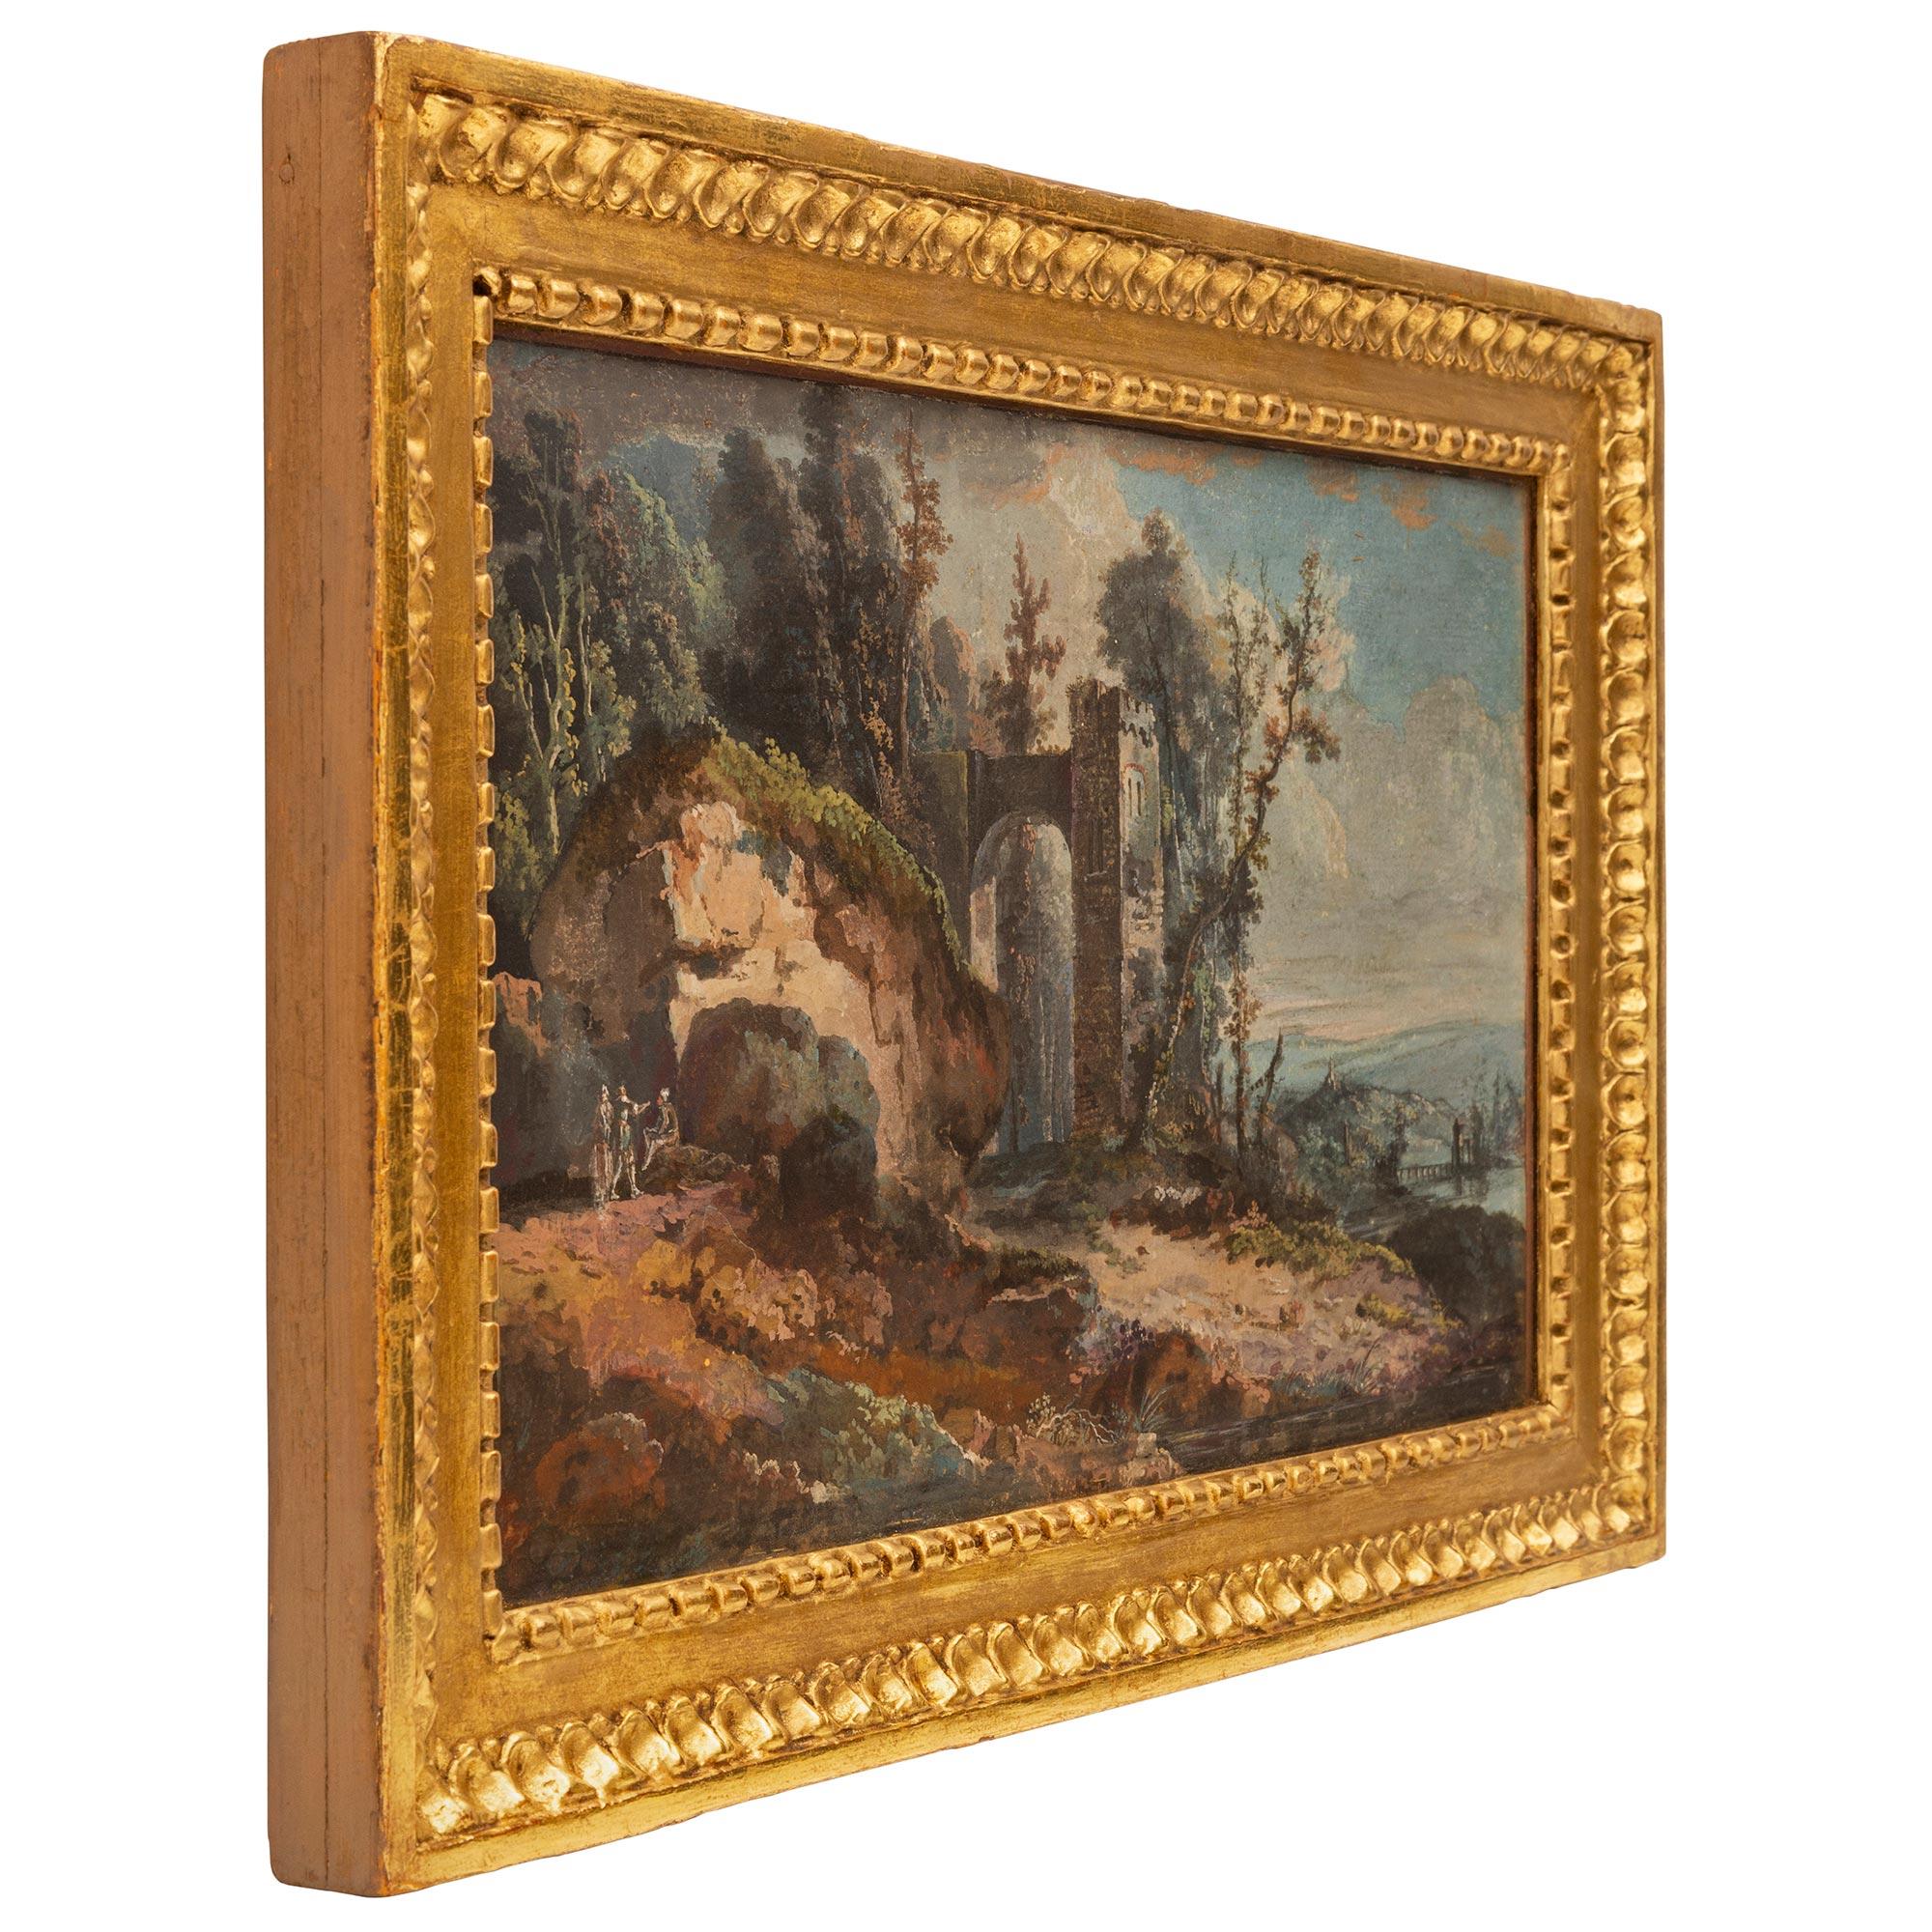 A charming Italian 18th century Louis XVI period gouache in its original giltwood frame. The wonderfully executed painting depicts a beautiful landscape of the Italian countryside with personages gathered next to a large boulder with a charming